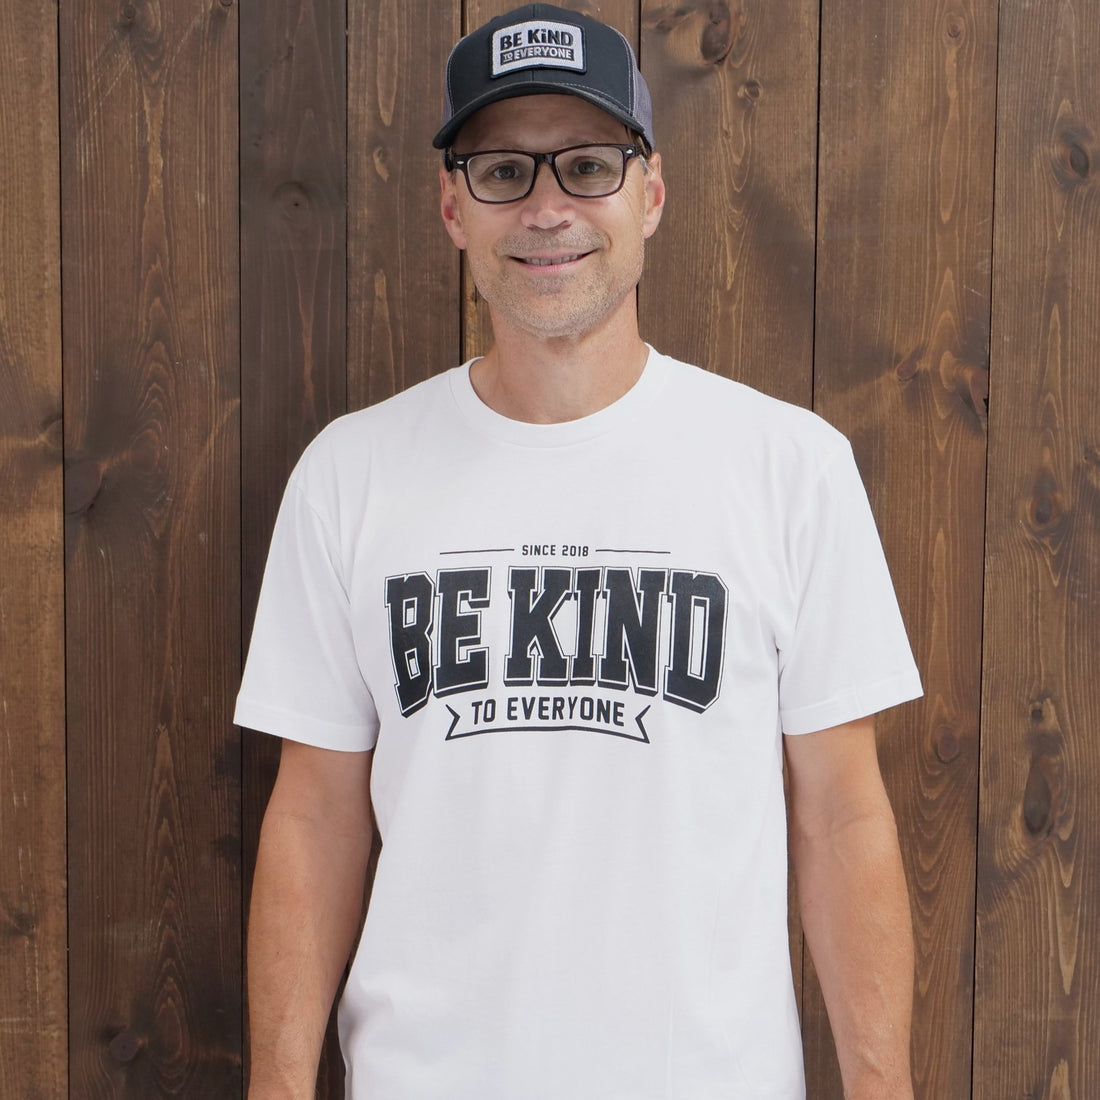 Our new "Ben" Be Kind to Everyone t-shirt in white.